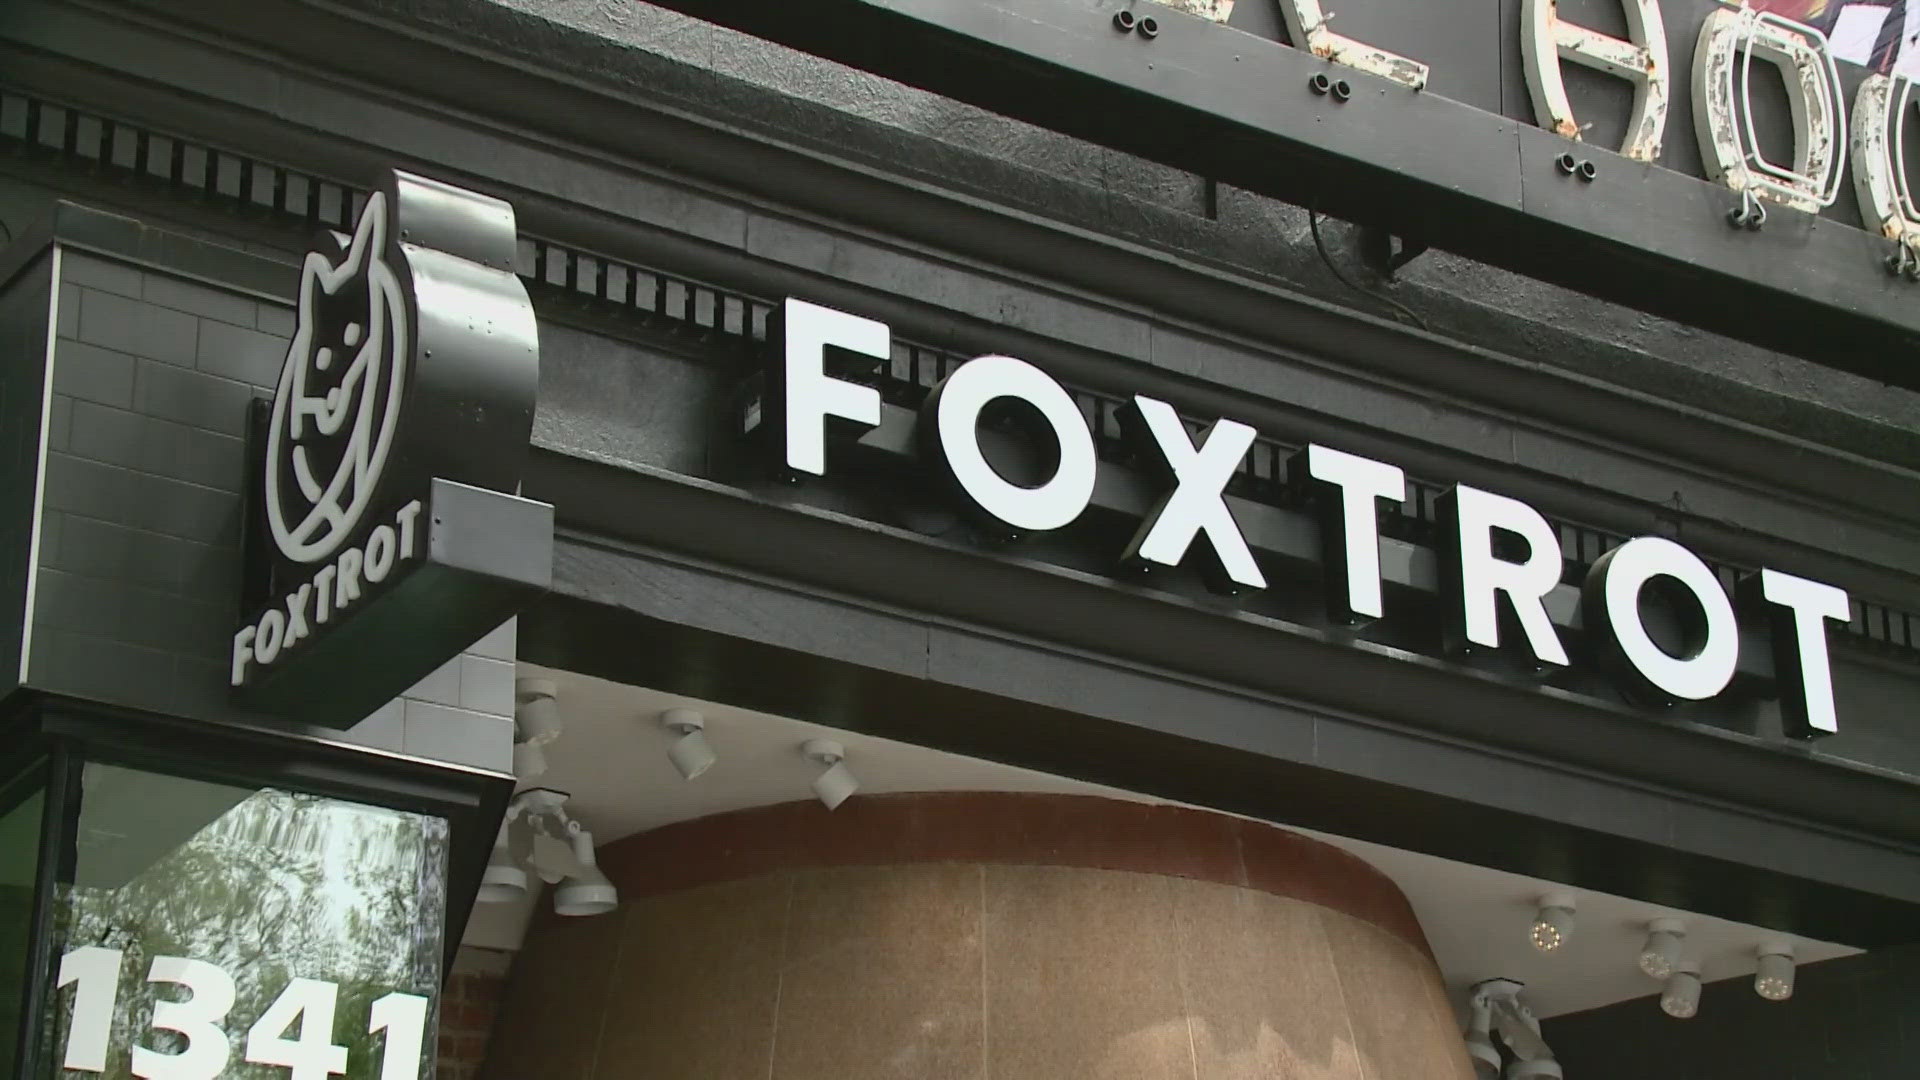 the company that owns the Foxtrot and Dom’s Market chain was slapped with a class action lawsuit for allegedly violating Illinois and federal labor laws.